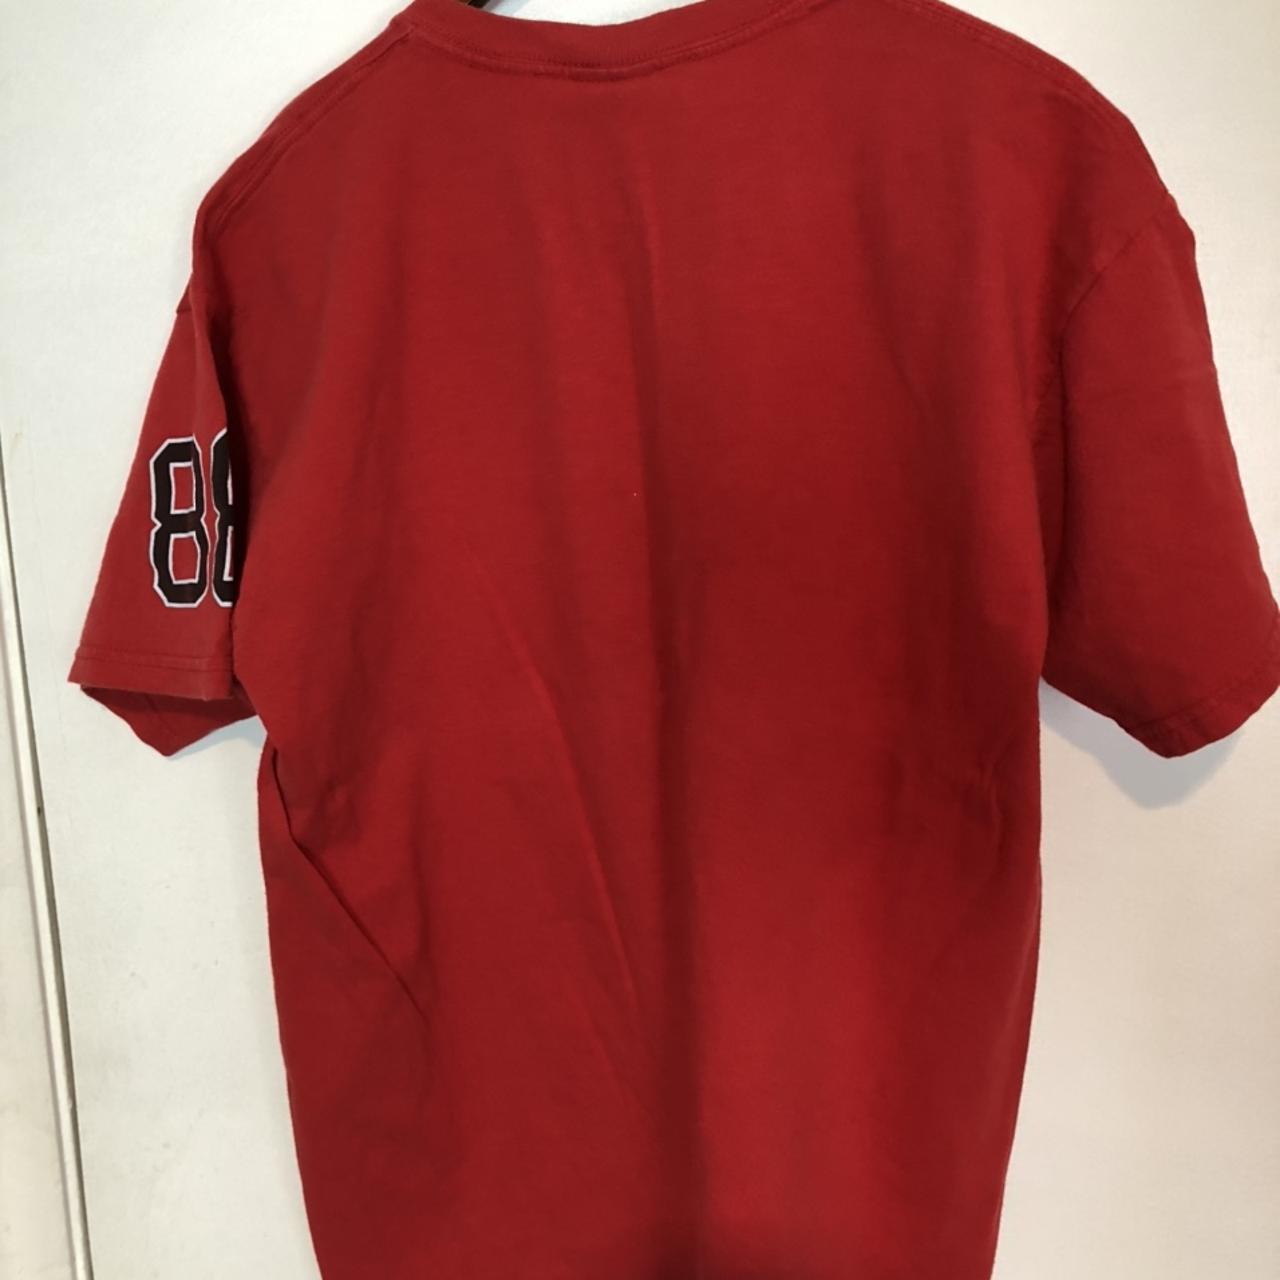 Armor Lux Men's Red and Black T-shirt (4)